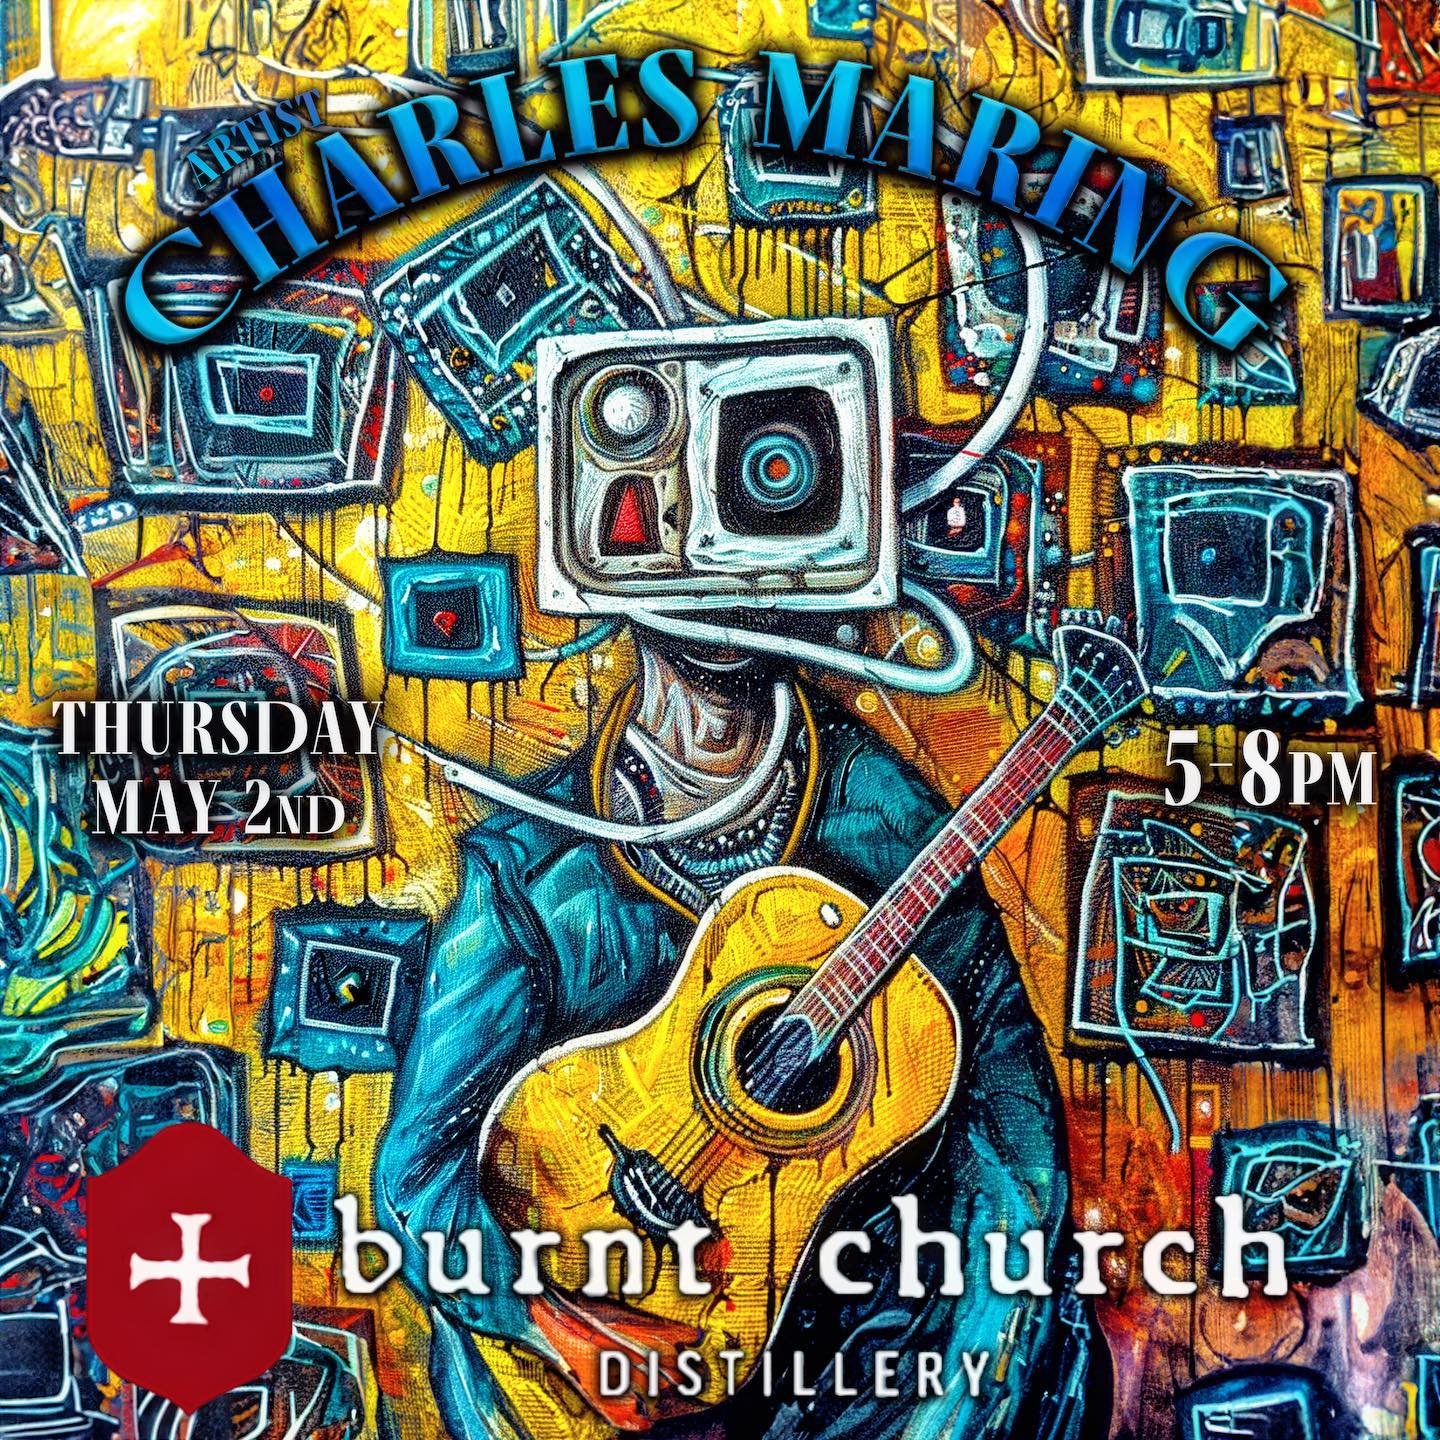 This evening 5-8pm catch me live at @burntchurchdistillery in #blufftonsc where there is an artisan market as well. Good times ahead on this beautiful ☀️ day. #livemusic #concert #acoustic #musician #songwriter